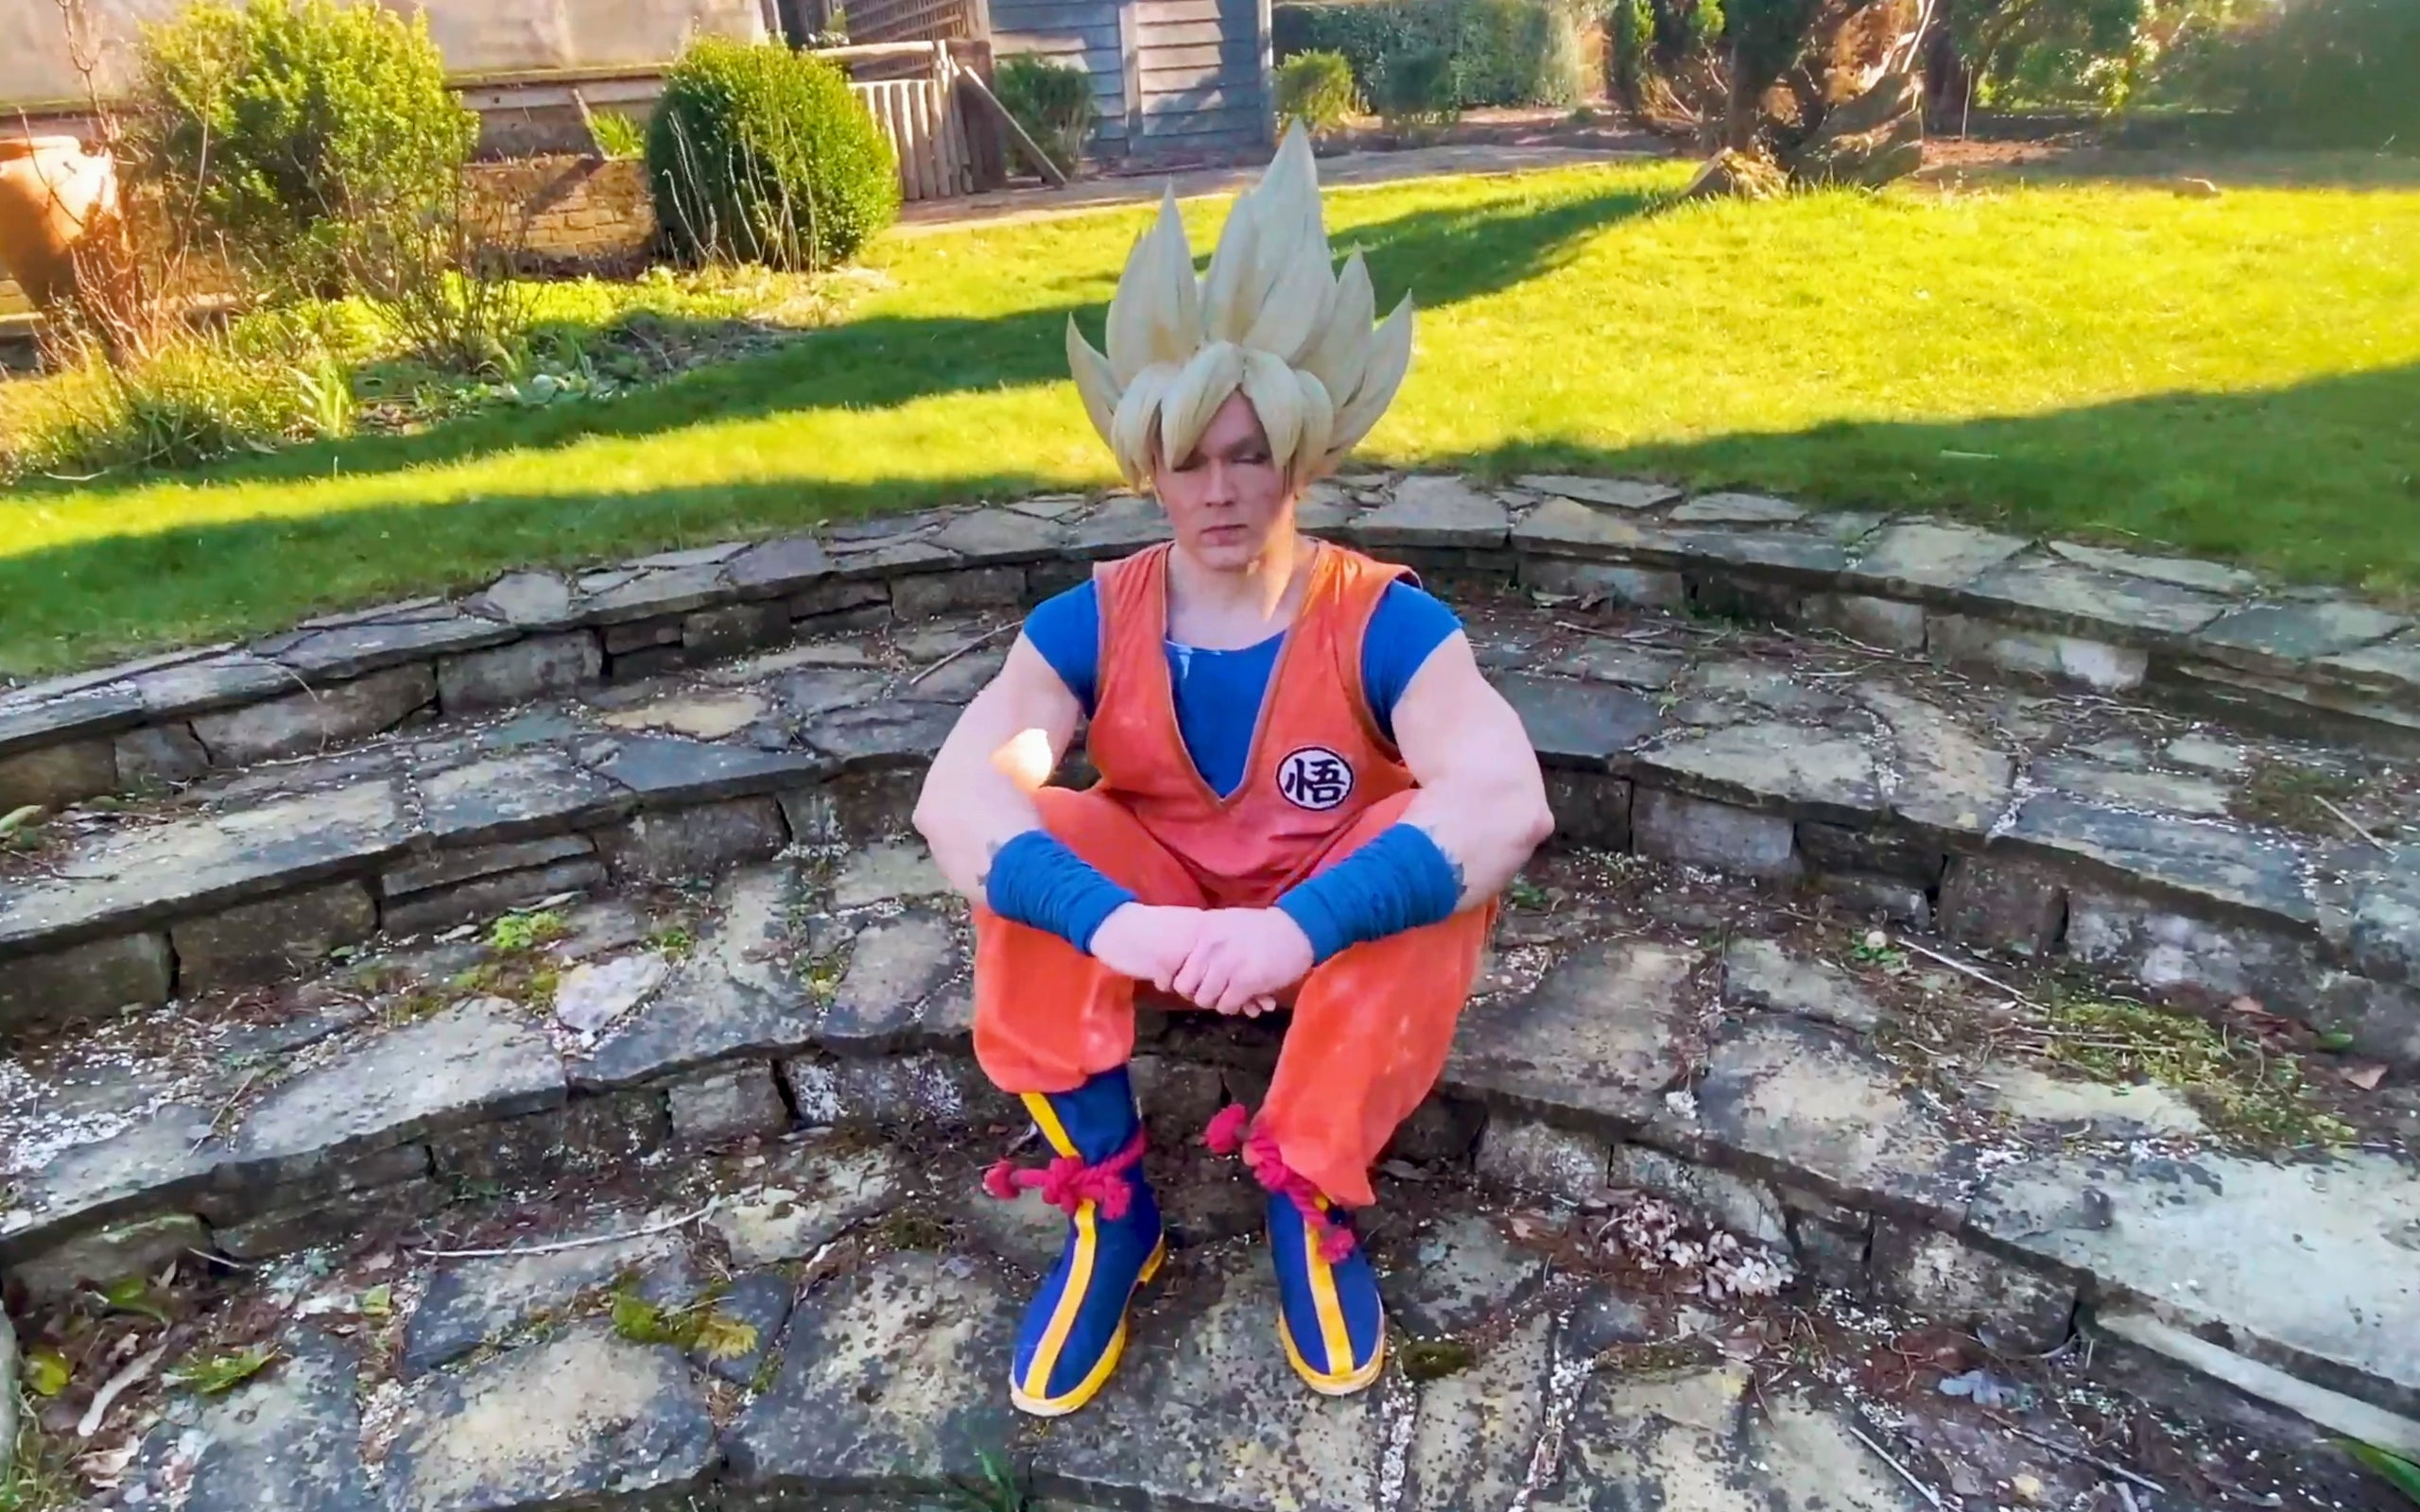 Dragon Ball Z Super Son Goku Cosplay Fitness Shows you How to keep calm in a crisis with meditation